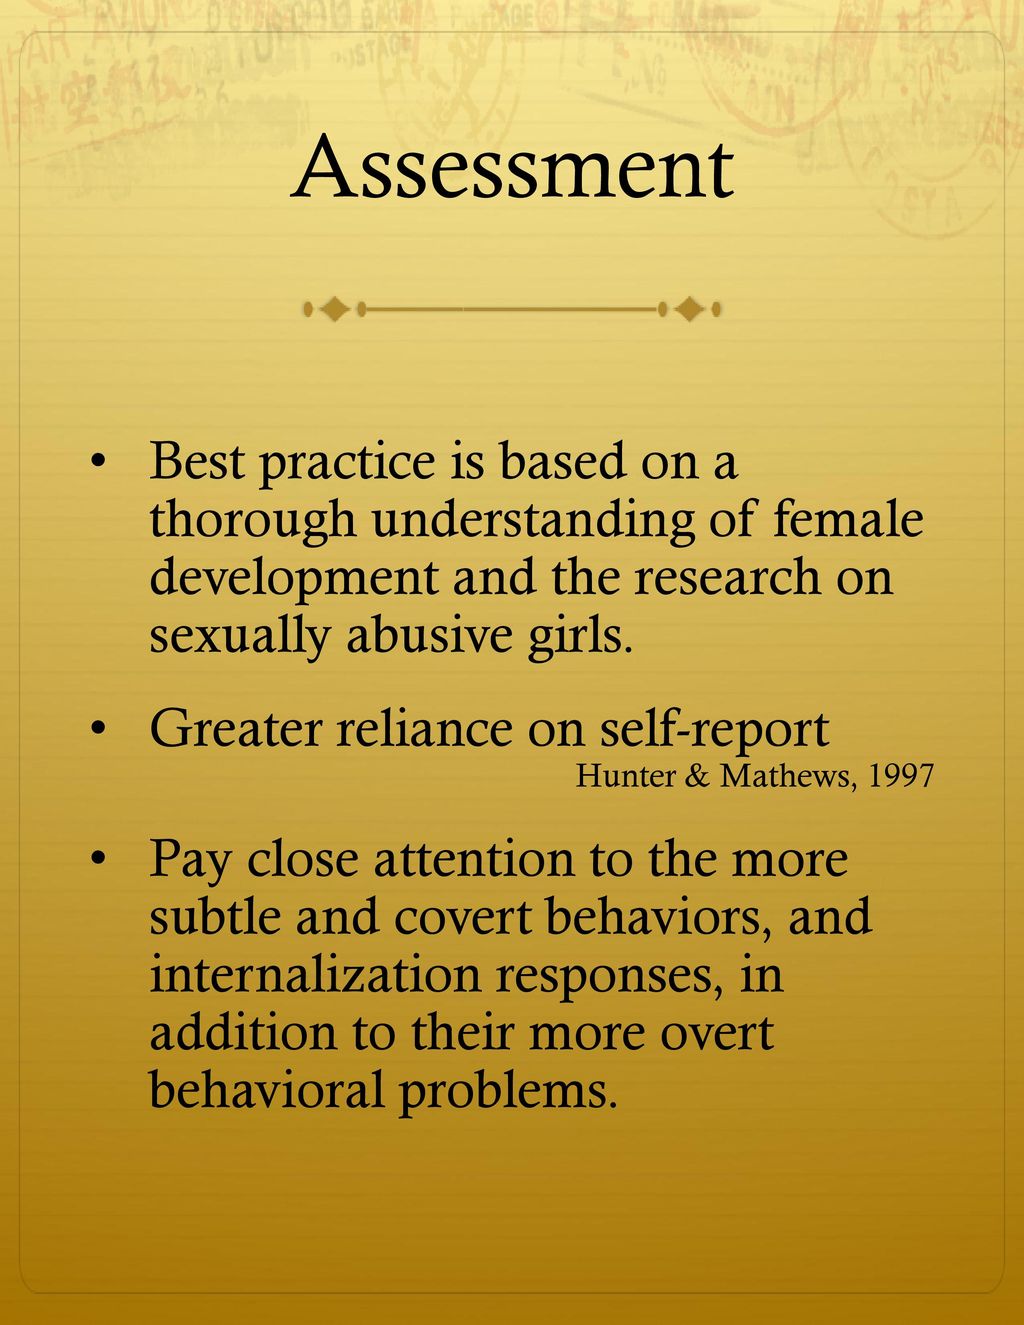 6/9/2018 Assessment. Best practice is based on a thorough understanding of female development and the research on sexually abusive girls.